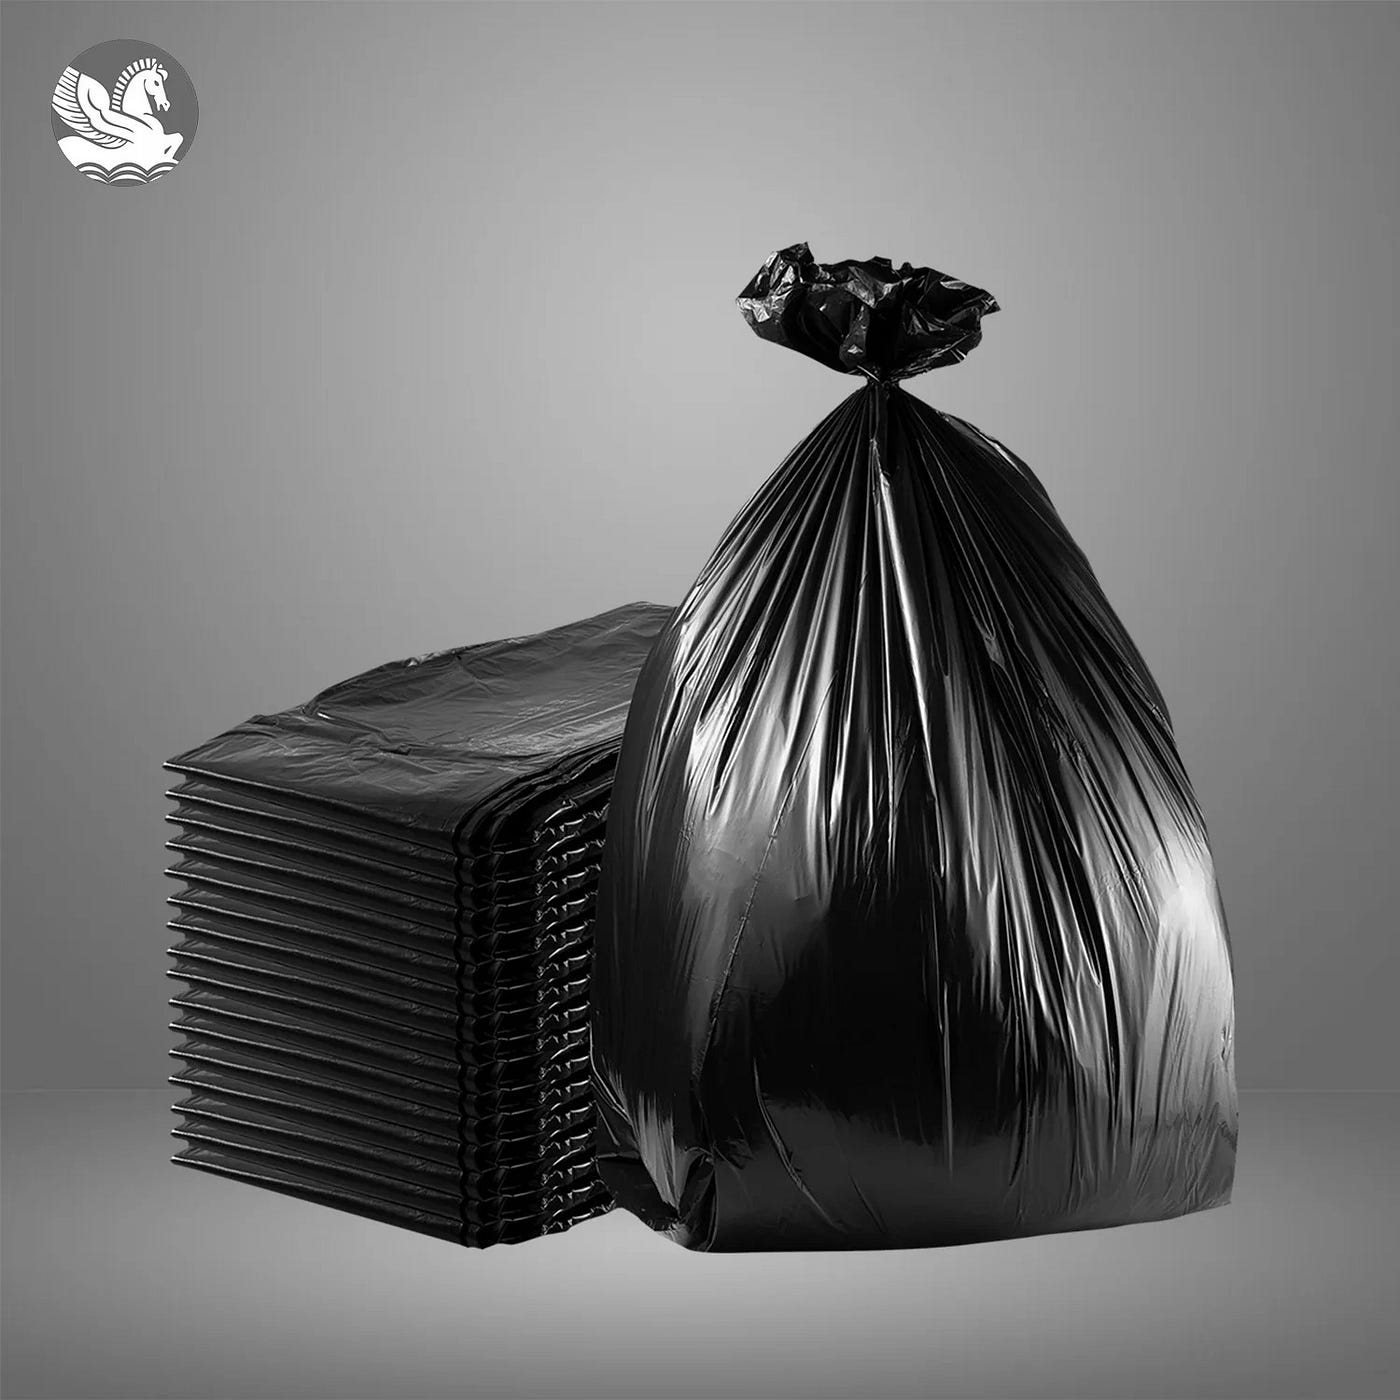 How to Choose Correct Plastic Garbage Bags for Your Applications?